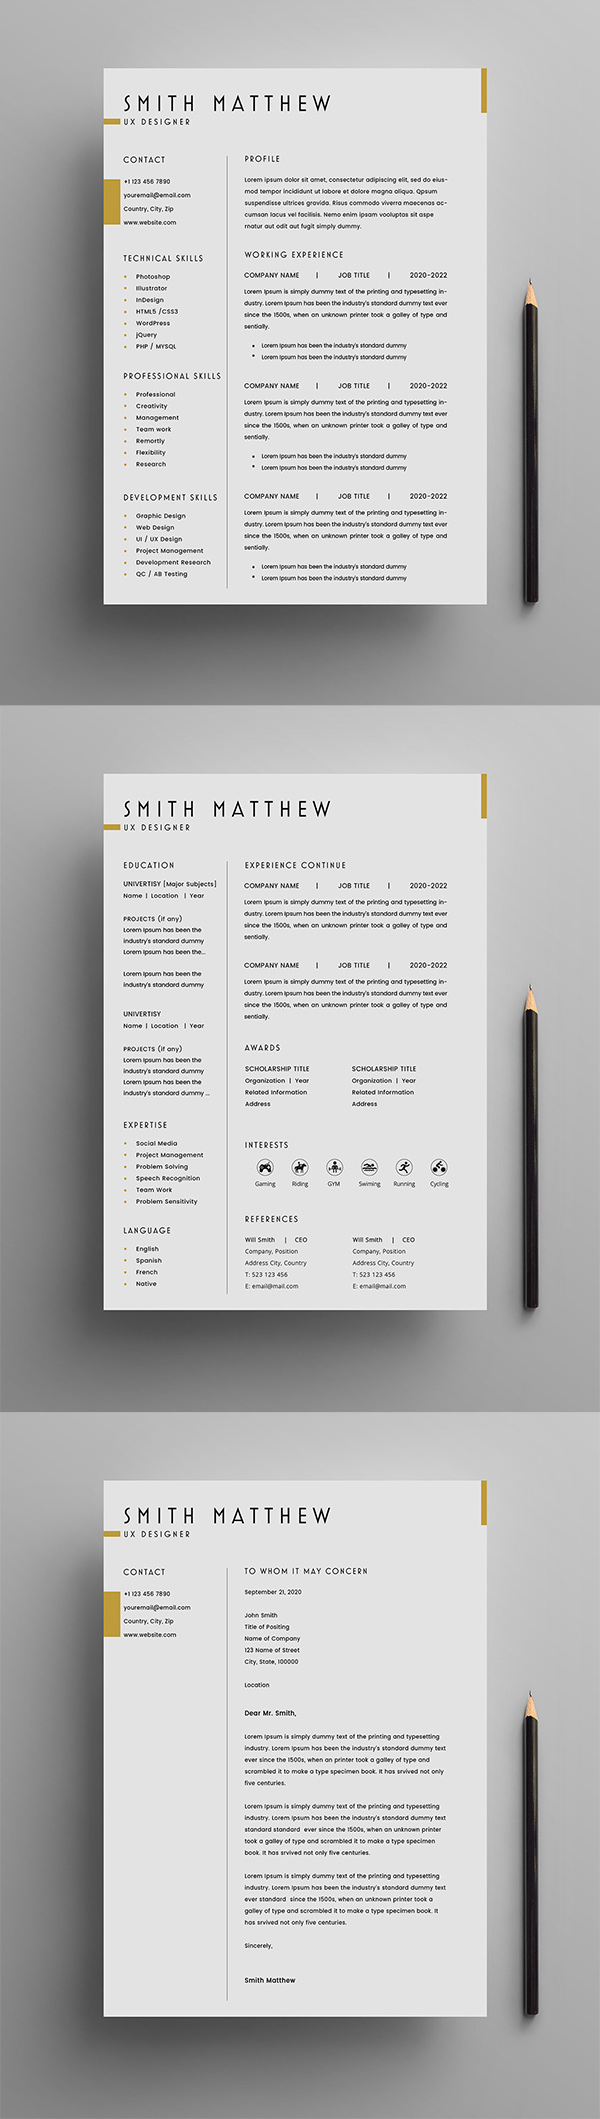 Free Resume Template (2 Pages Resume)